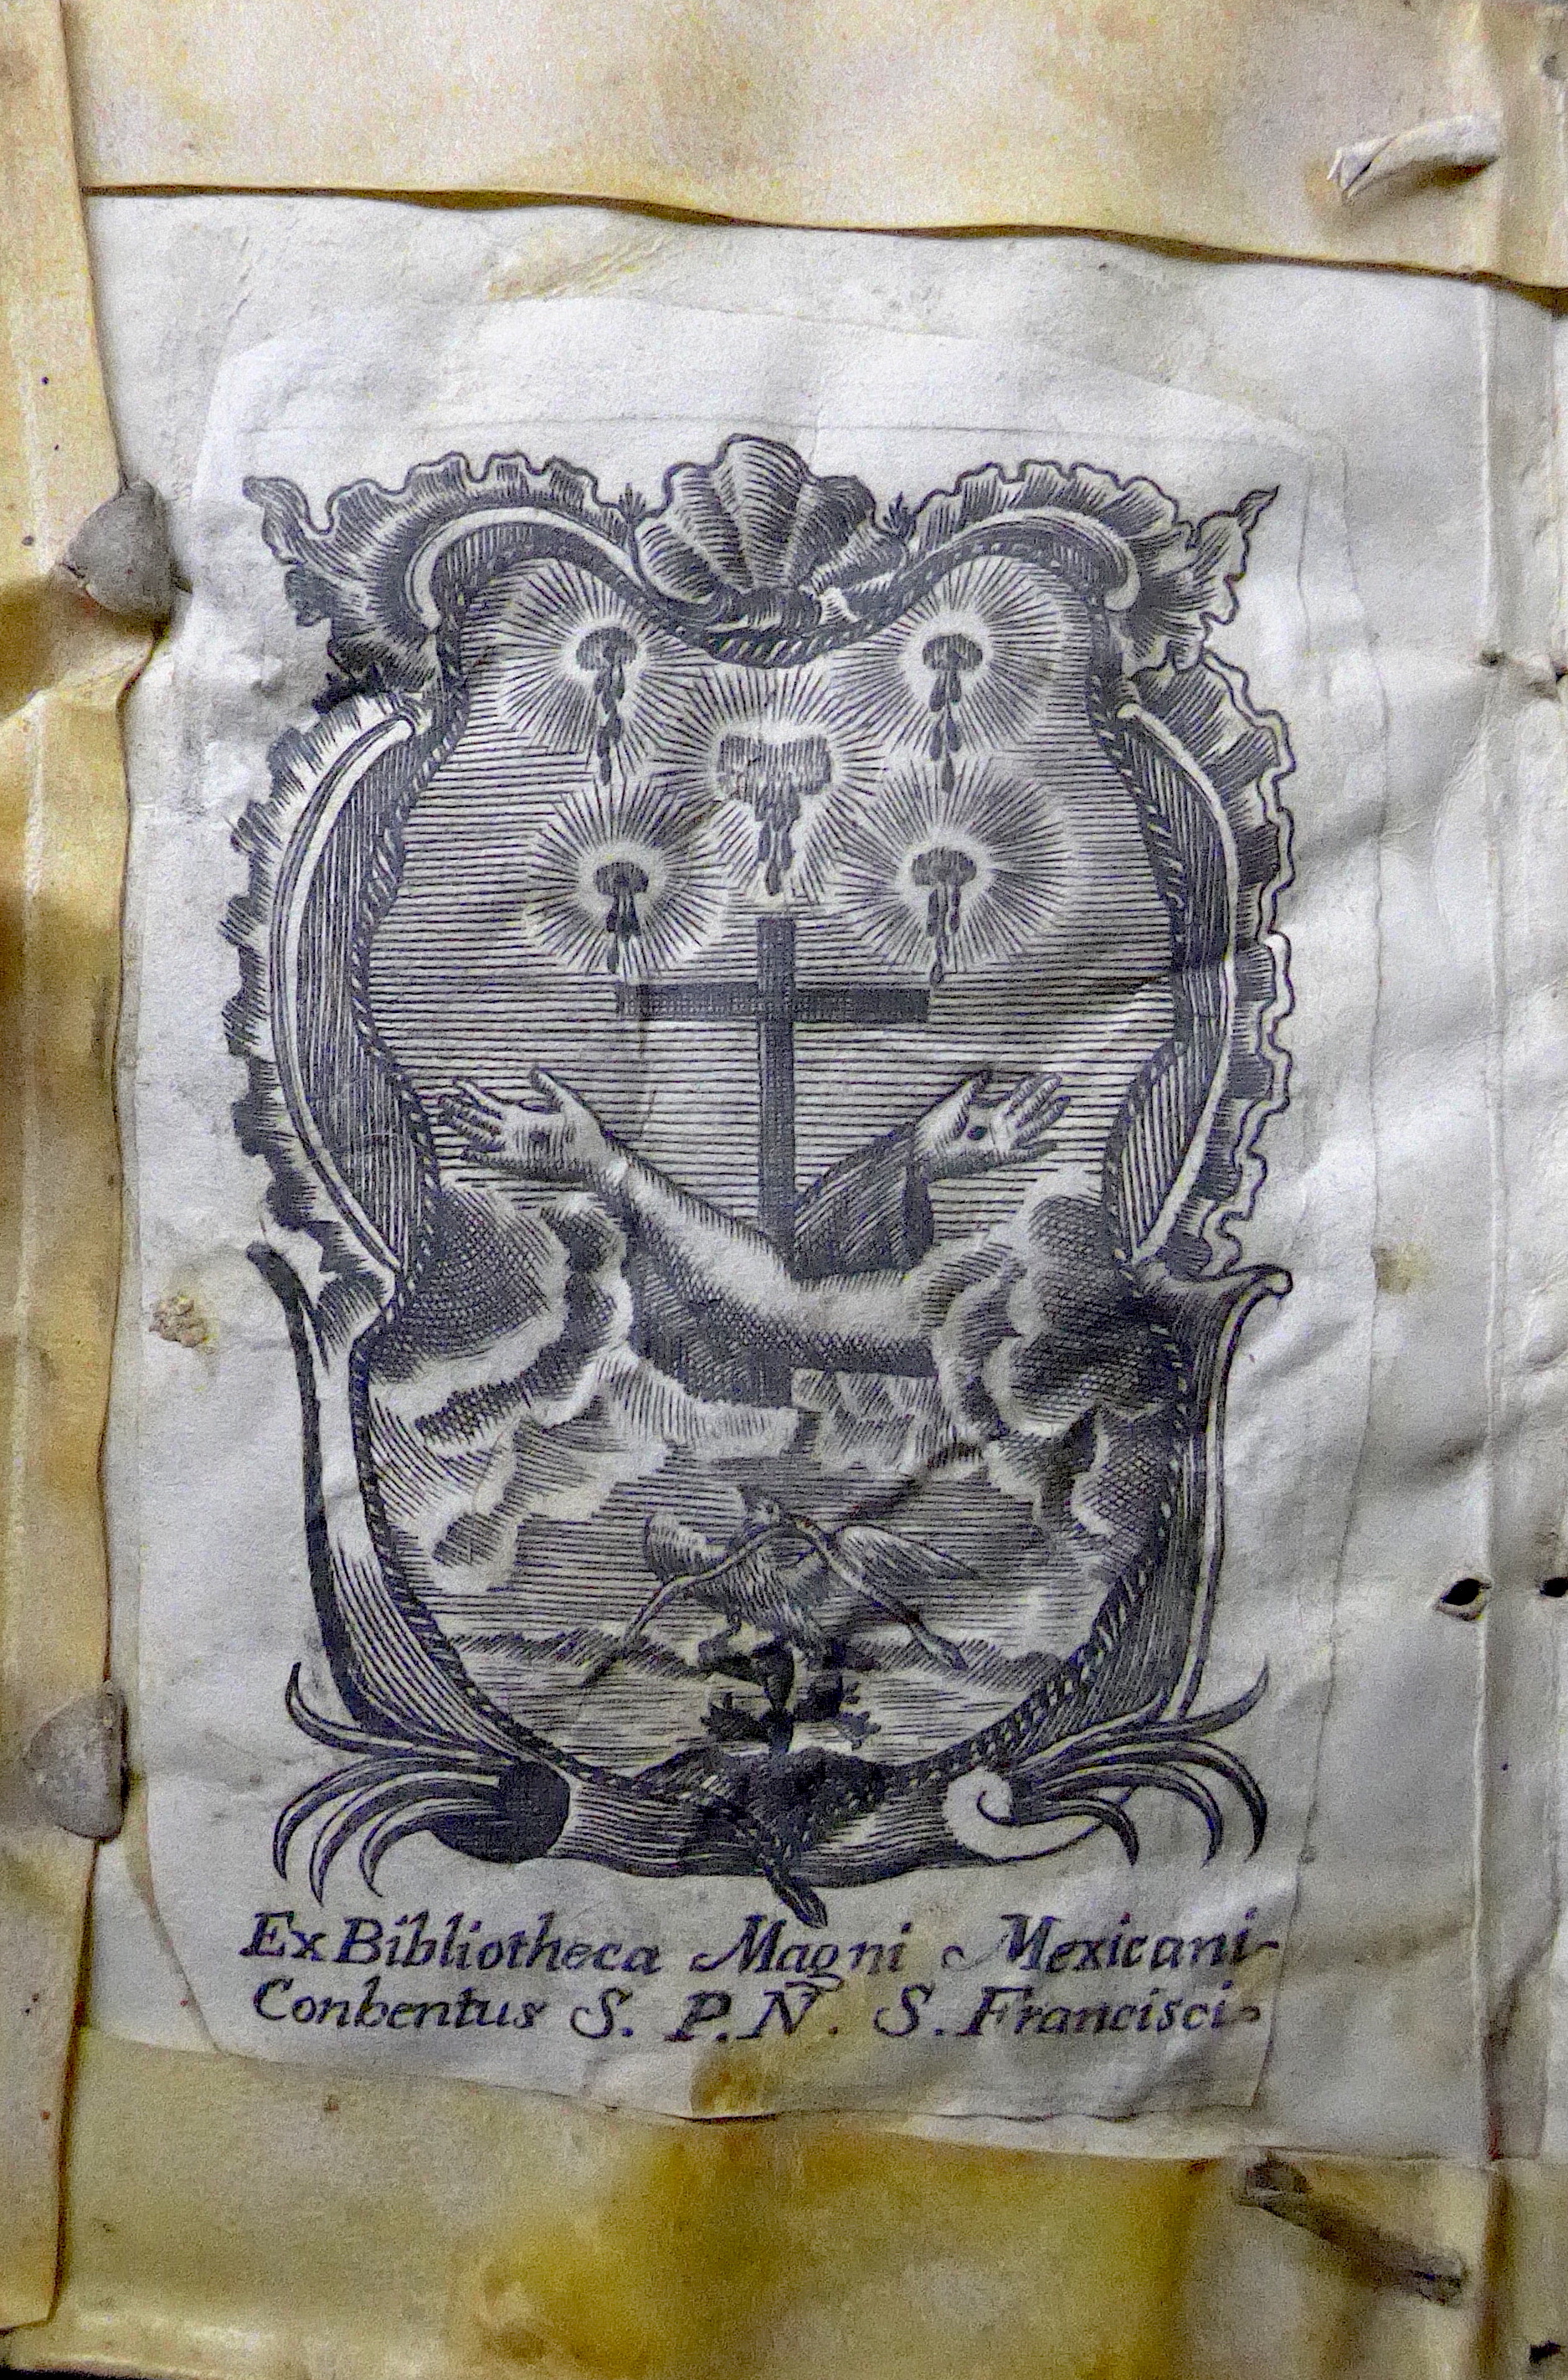 Bookplate from the library of the convent of St Francis, one of the most influential religious precincts in the New World. Established in Mexico City in 1525, the library held over 16,000 volumes in the eighteenth century. In Juan Bautista, Admonitions for Confessors (Mexico City, 1601).